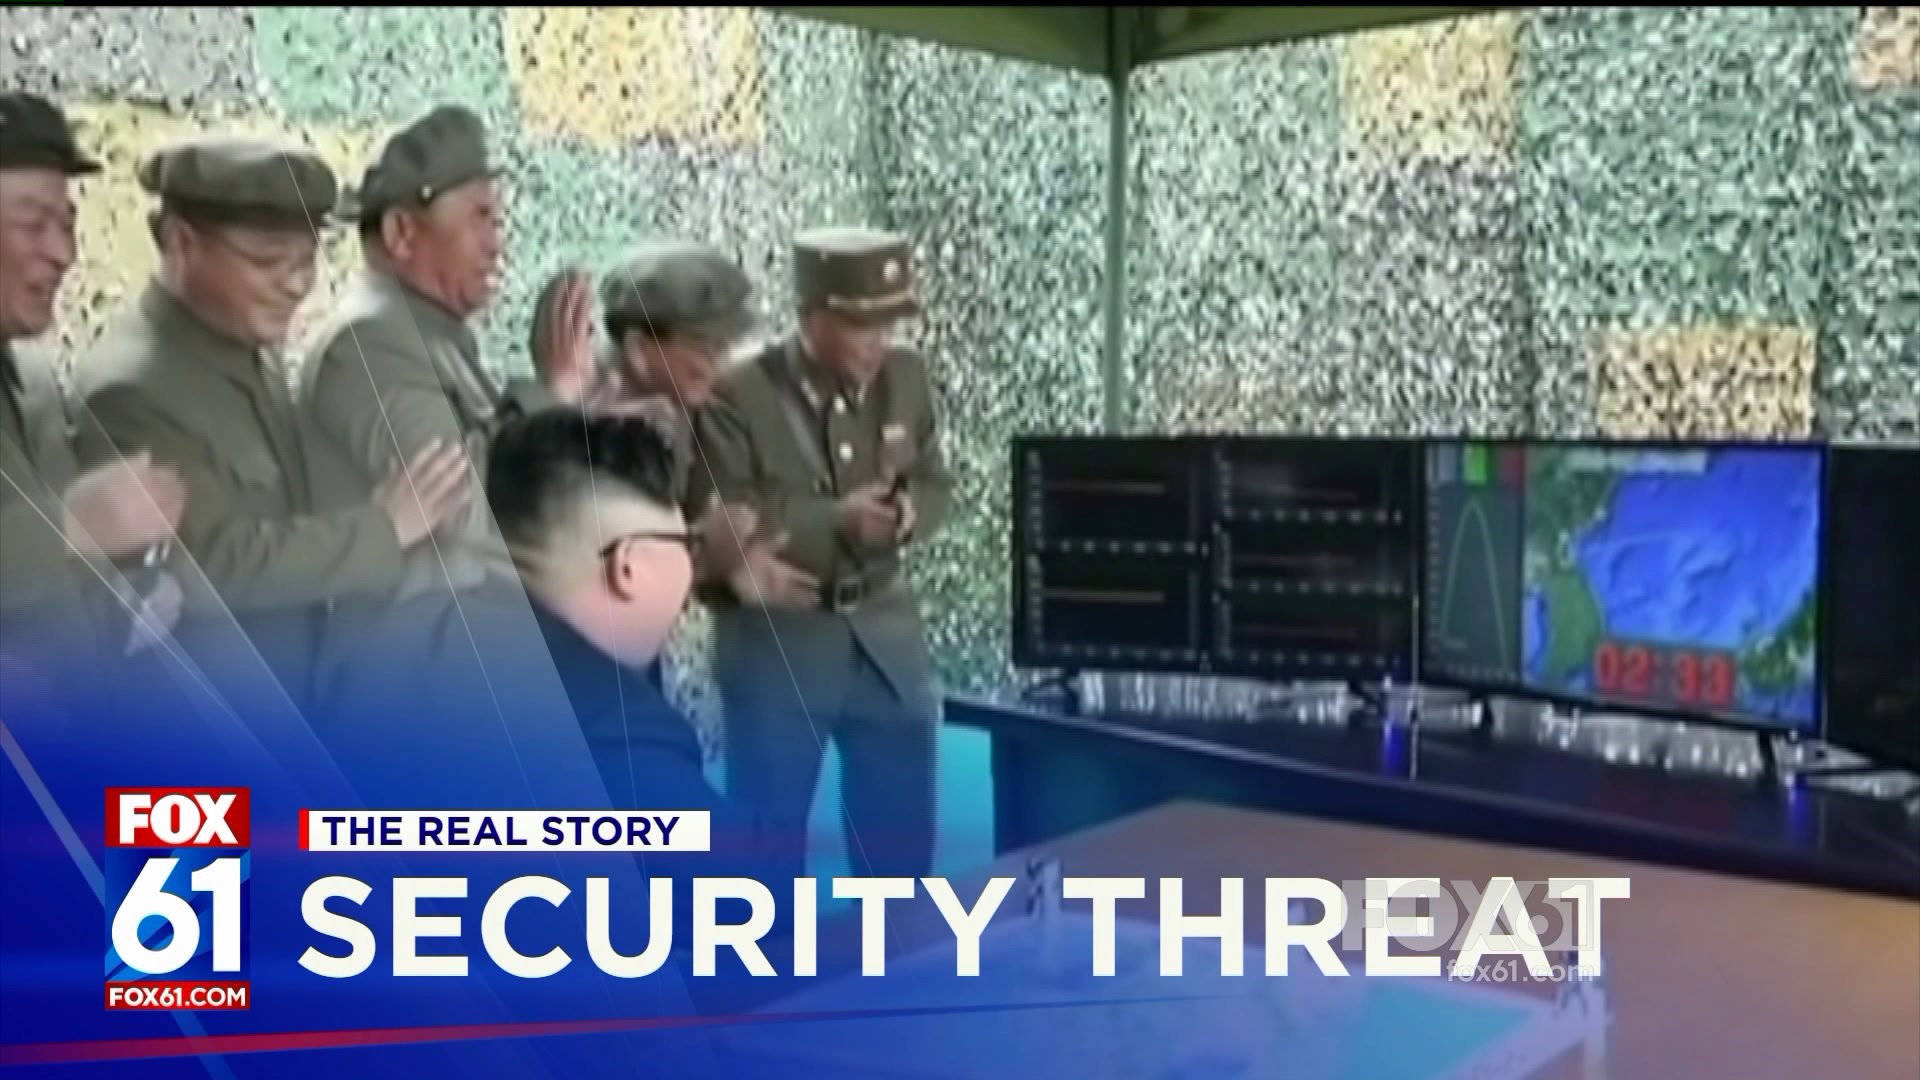 The Real Story -- Security Threat